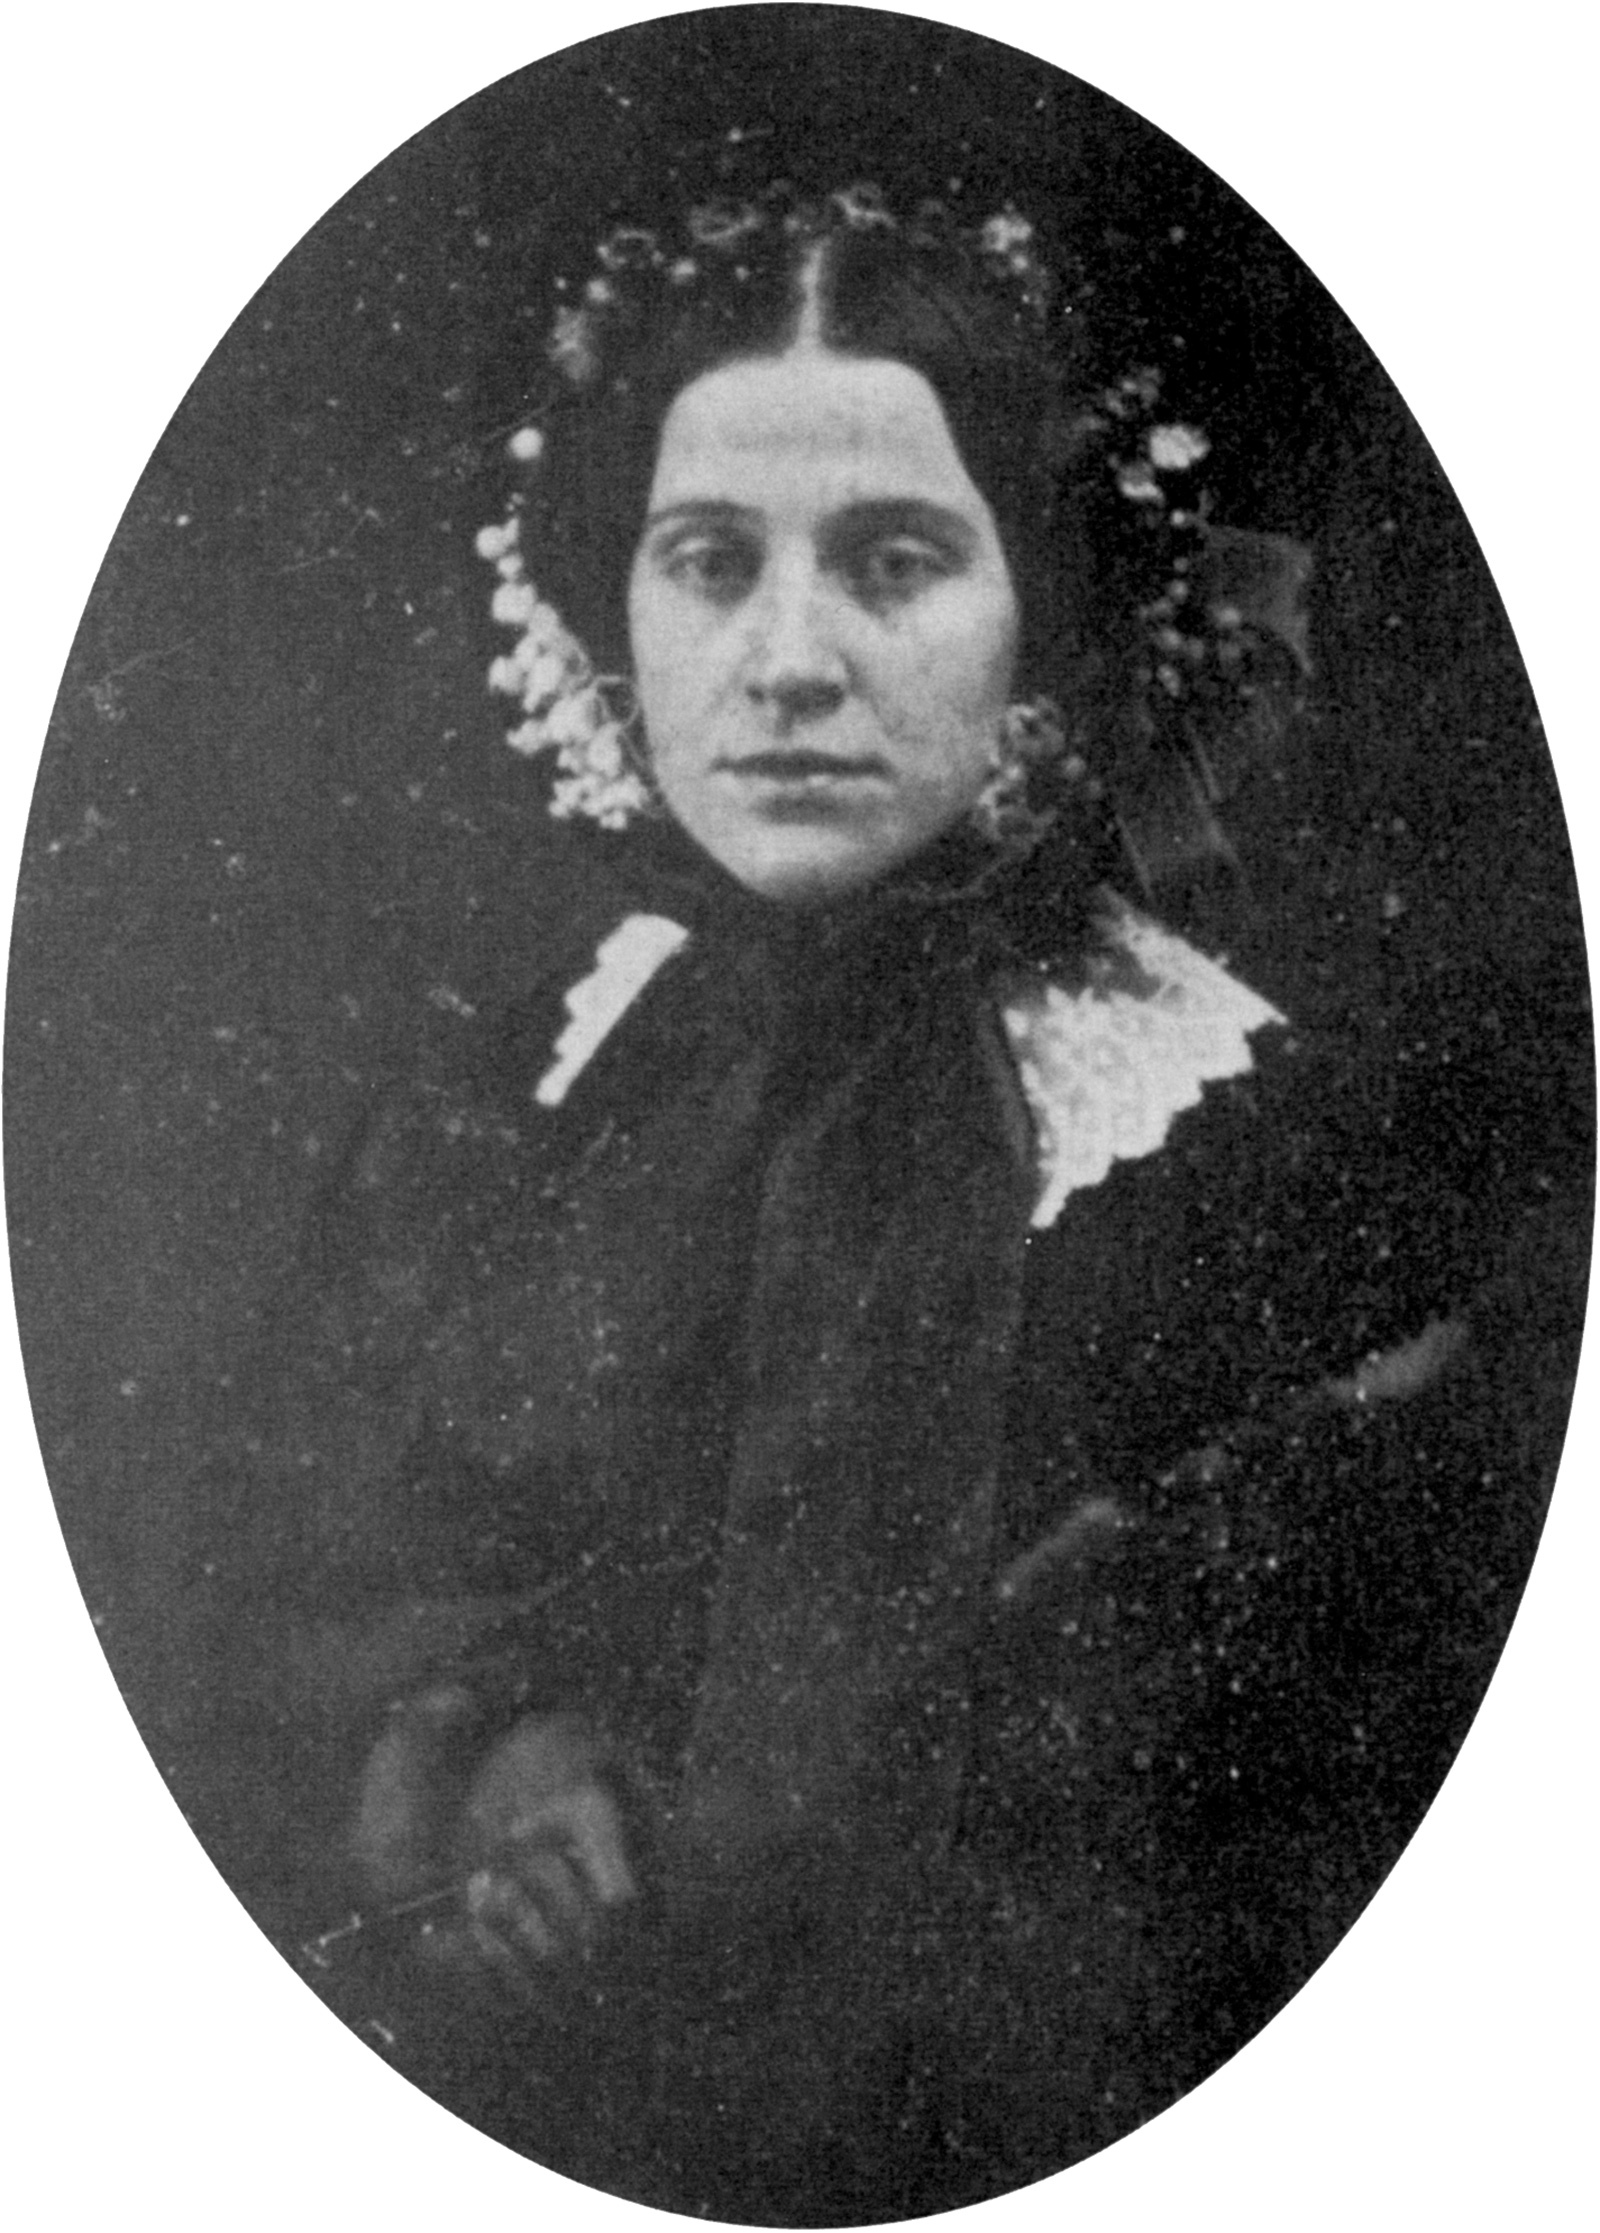 Susan Gilbert Dickinson on the day of her wedding to Emily Dickinson’s brother, Austin, July 1, 1856